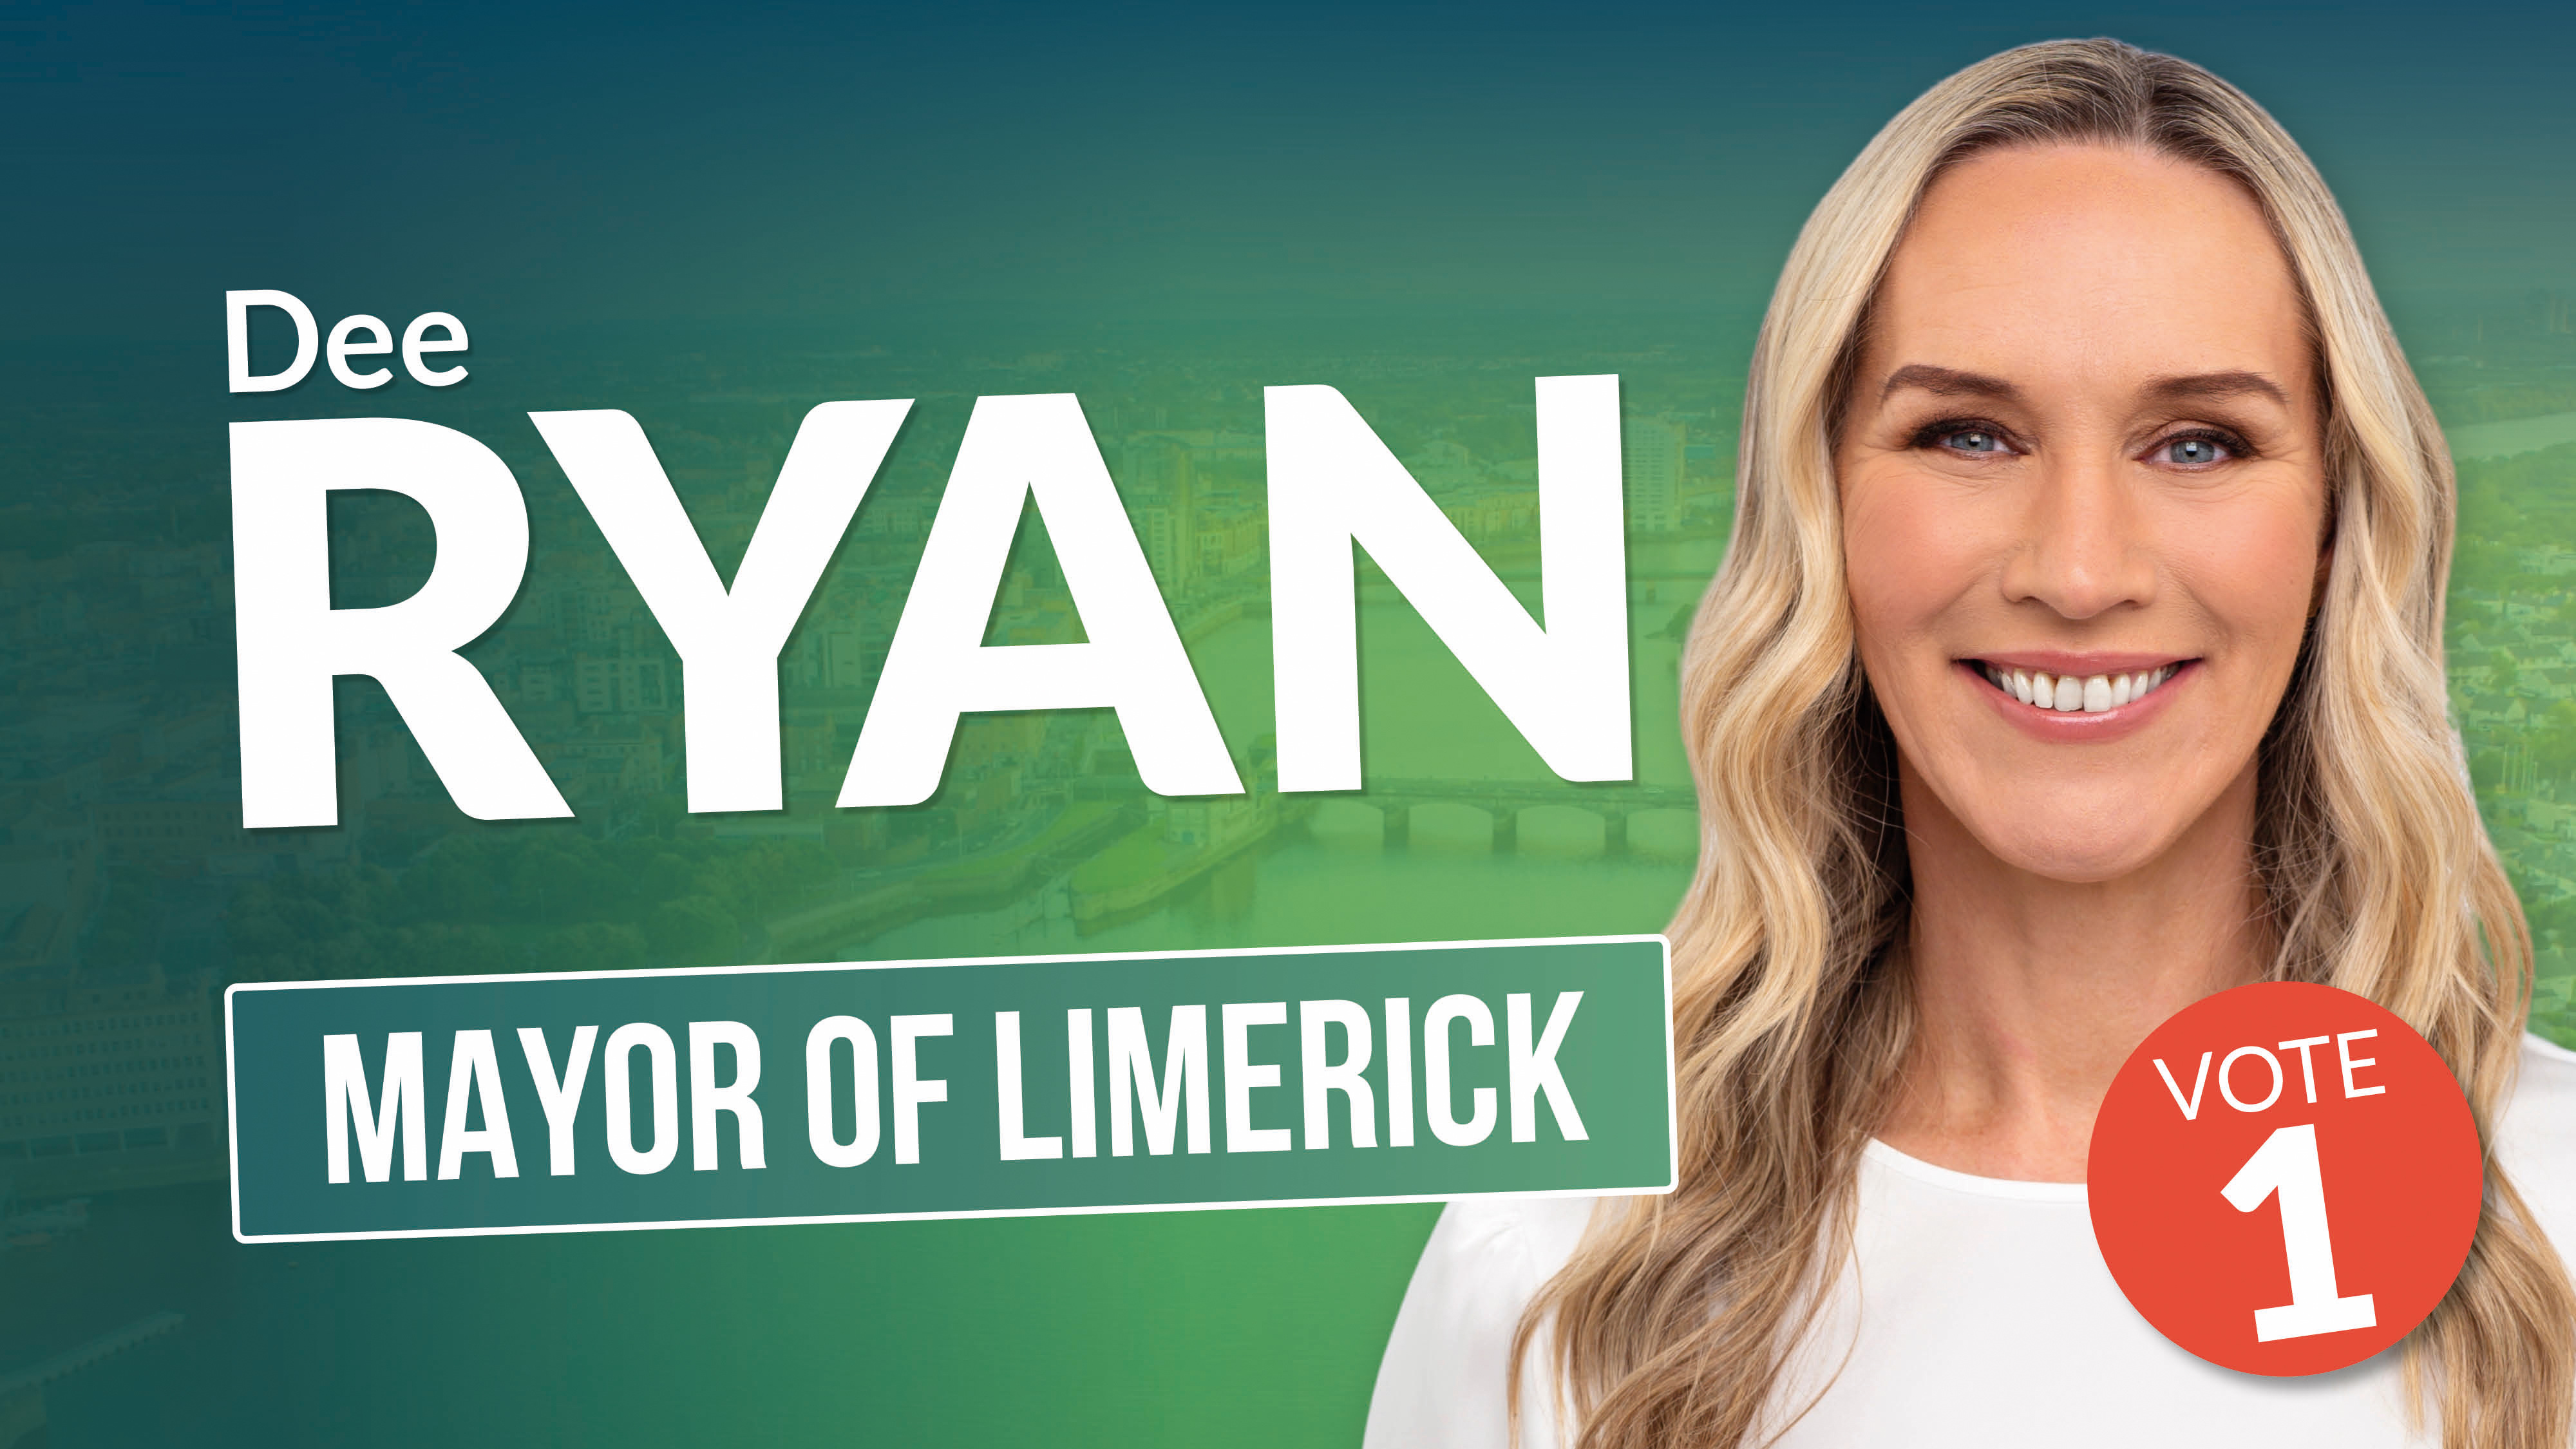 Fianna Fáil candidate calls for fairness and inclusion of all Independents in upcoming RTÉ Mayoral debate